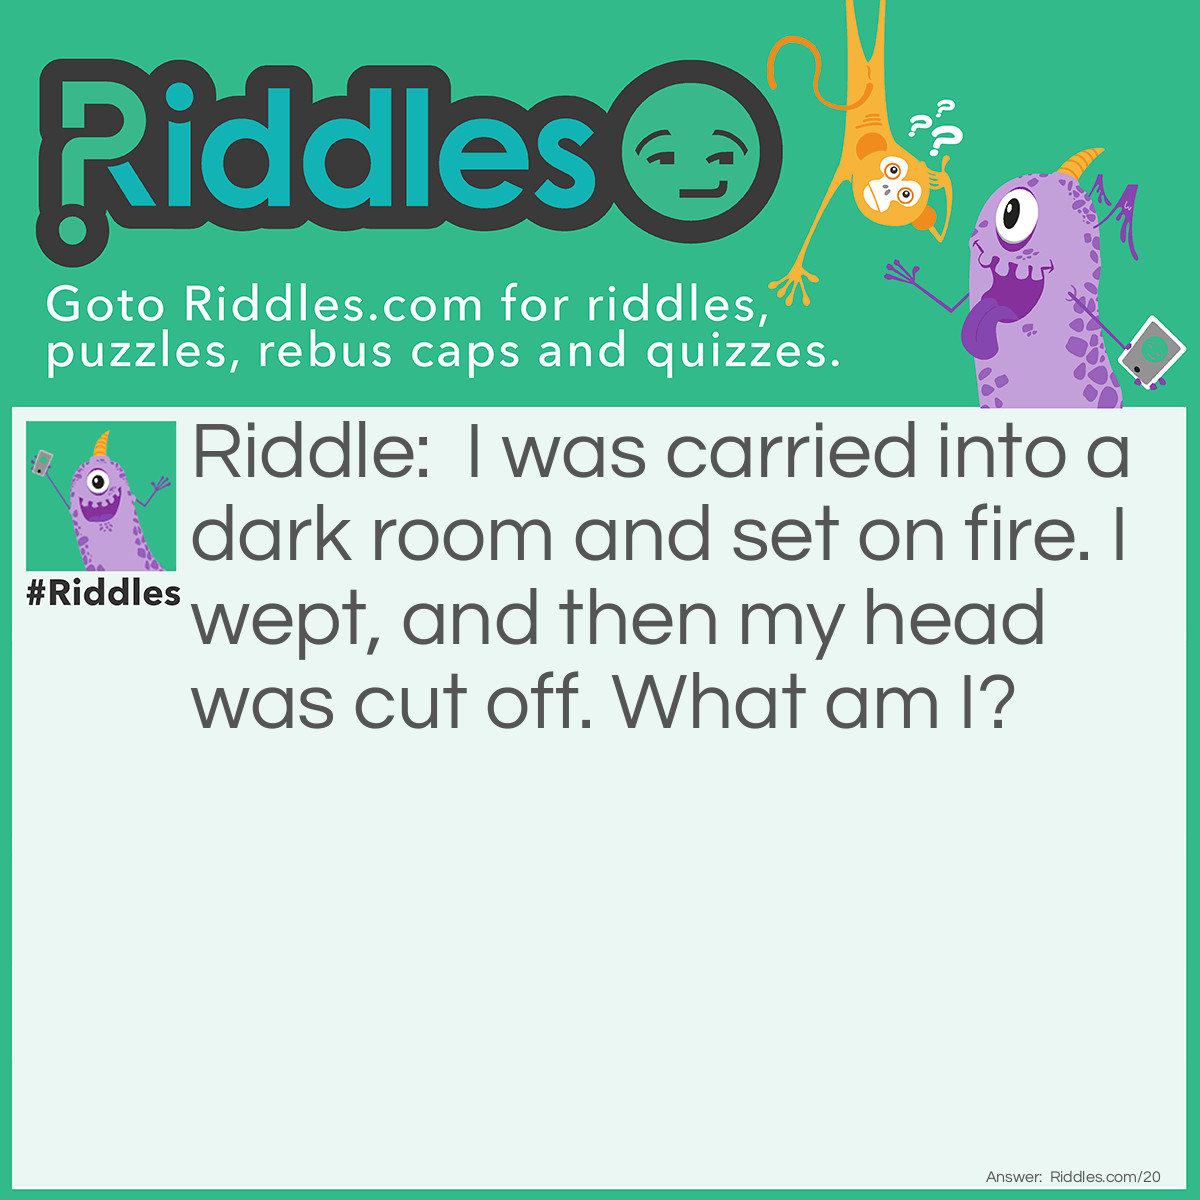 Riddle: I was carried into a dark room and set on fire. I wept, and then my head was cut off. What am I? Answer: A Candle.